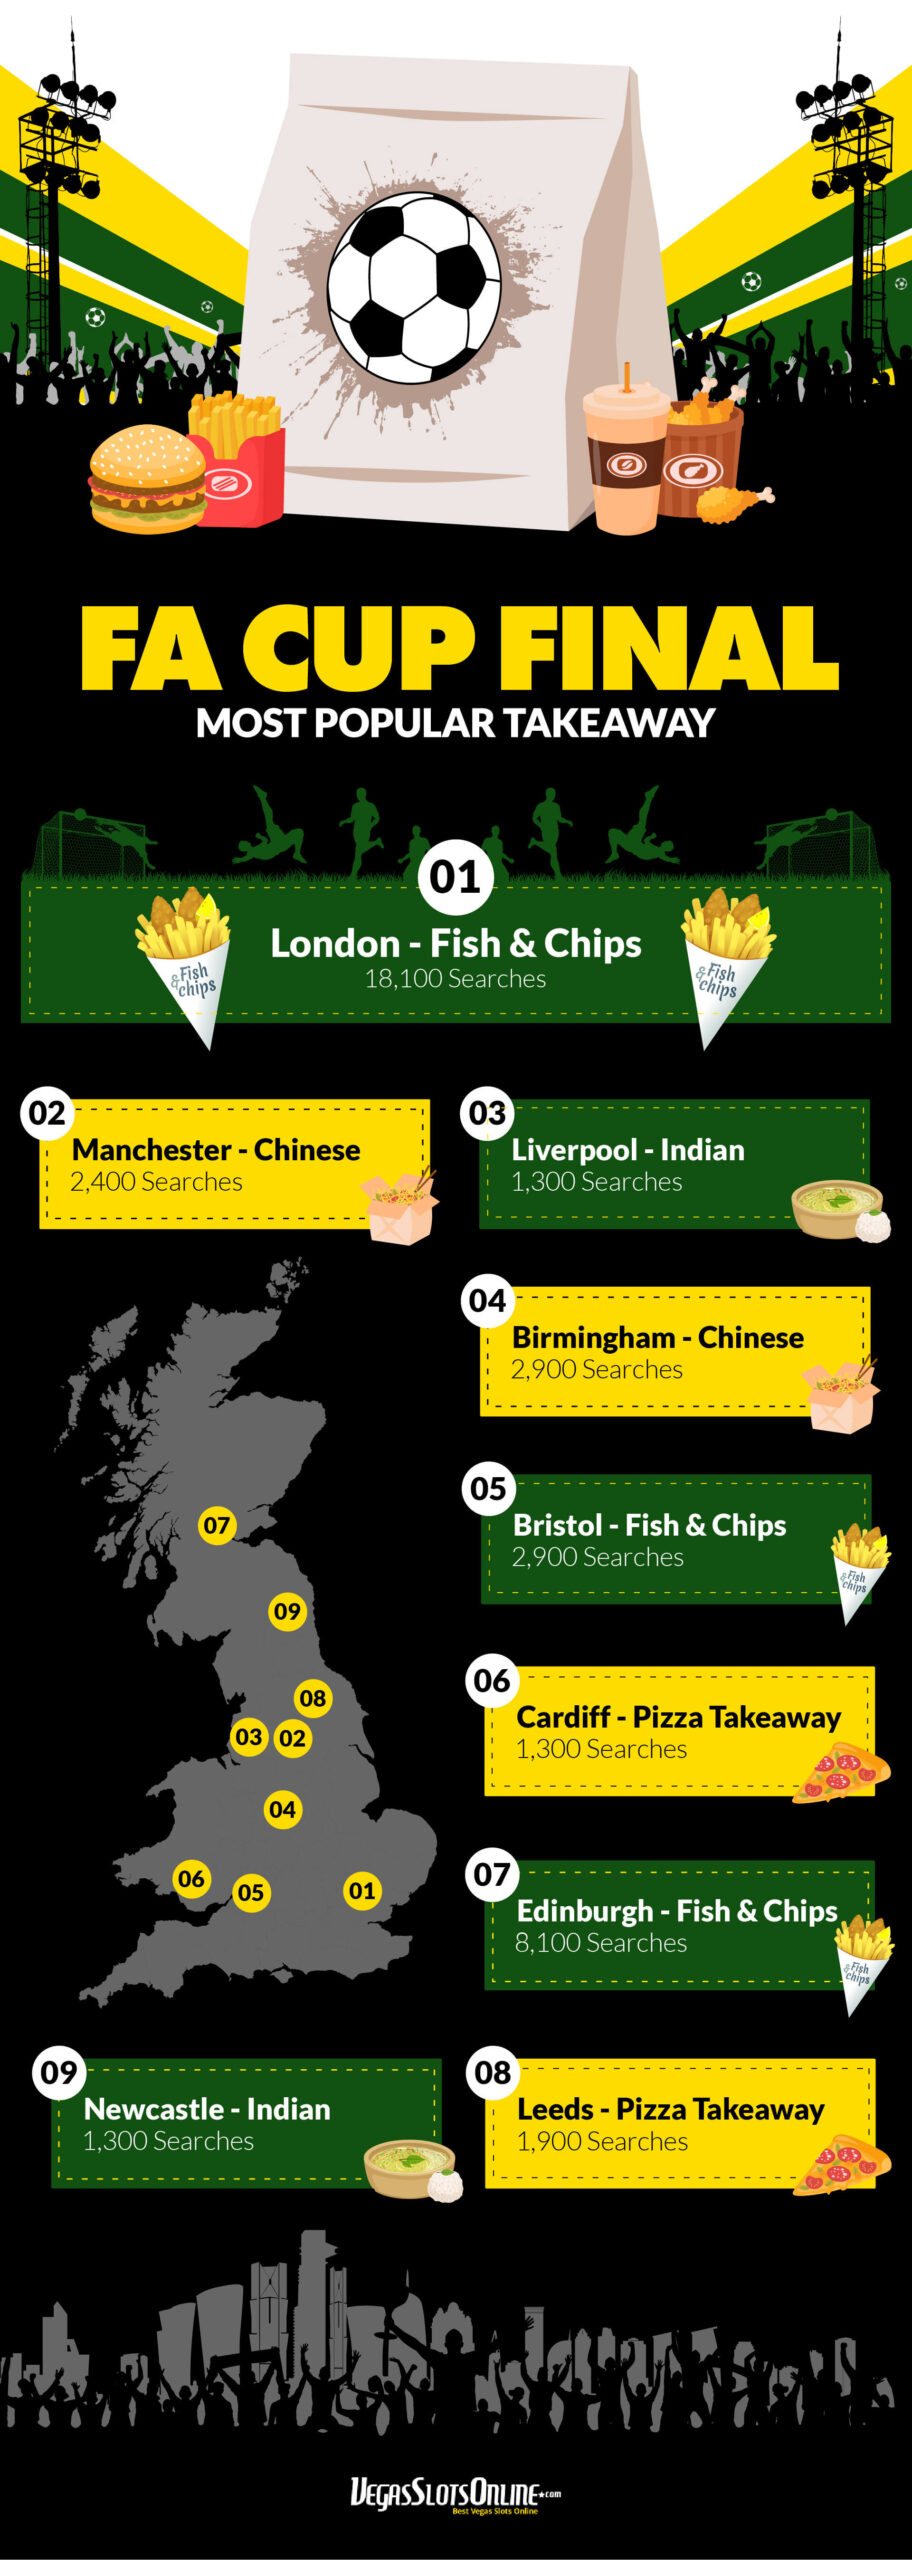 FA Cup Final Viewers Favor Fish and Chips Over All Other Takeaways